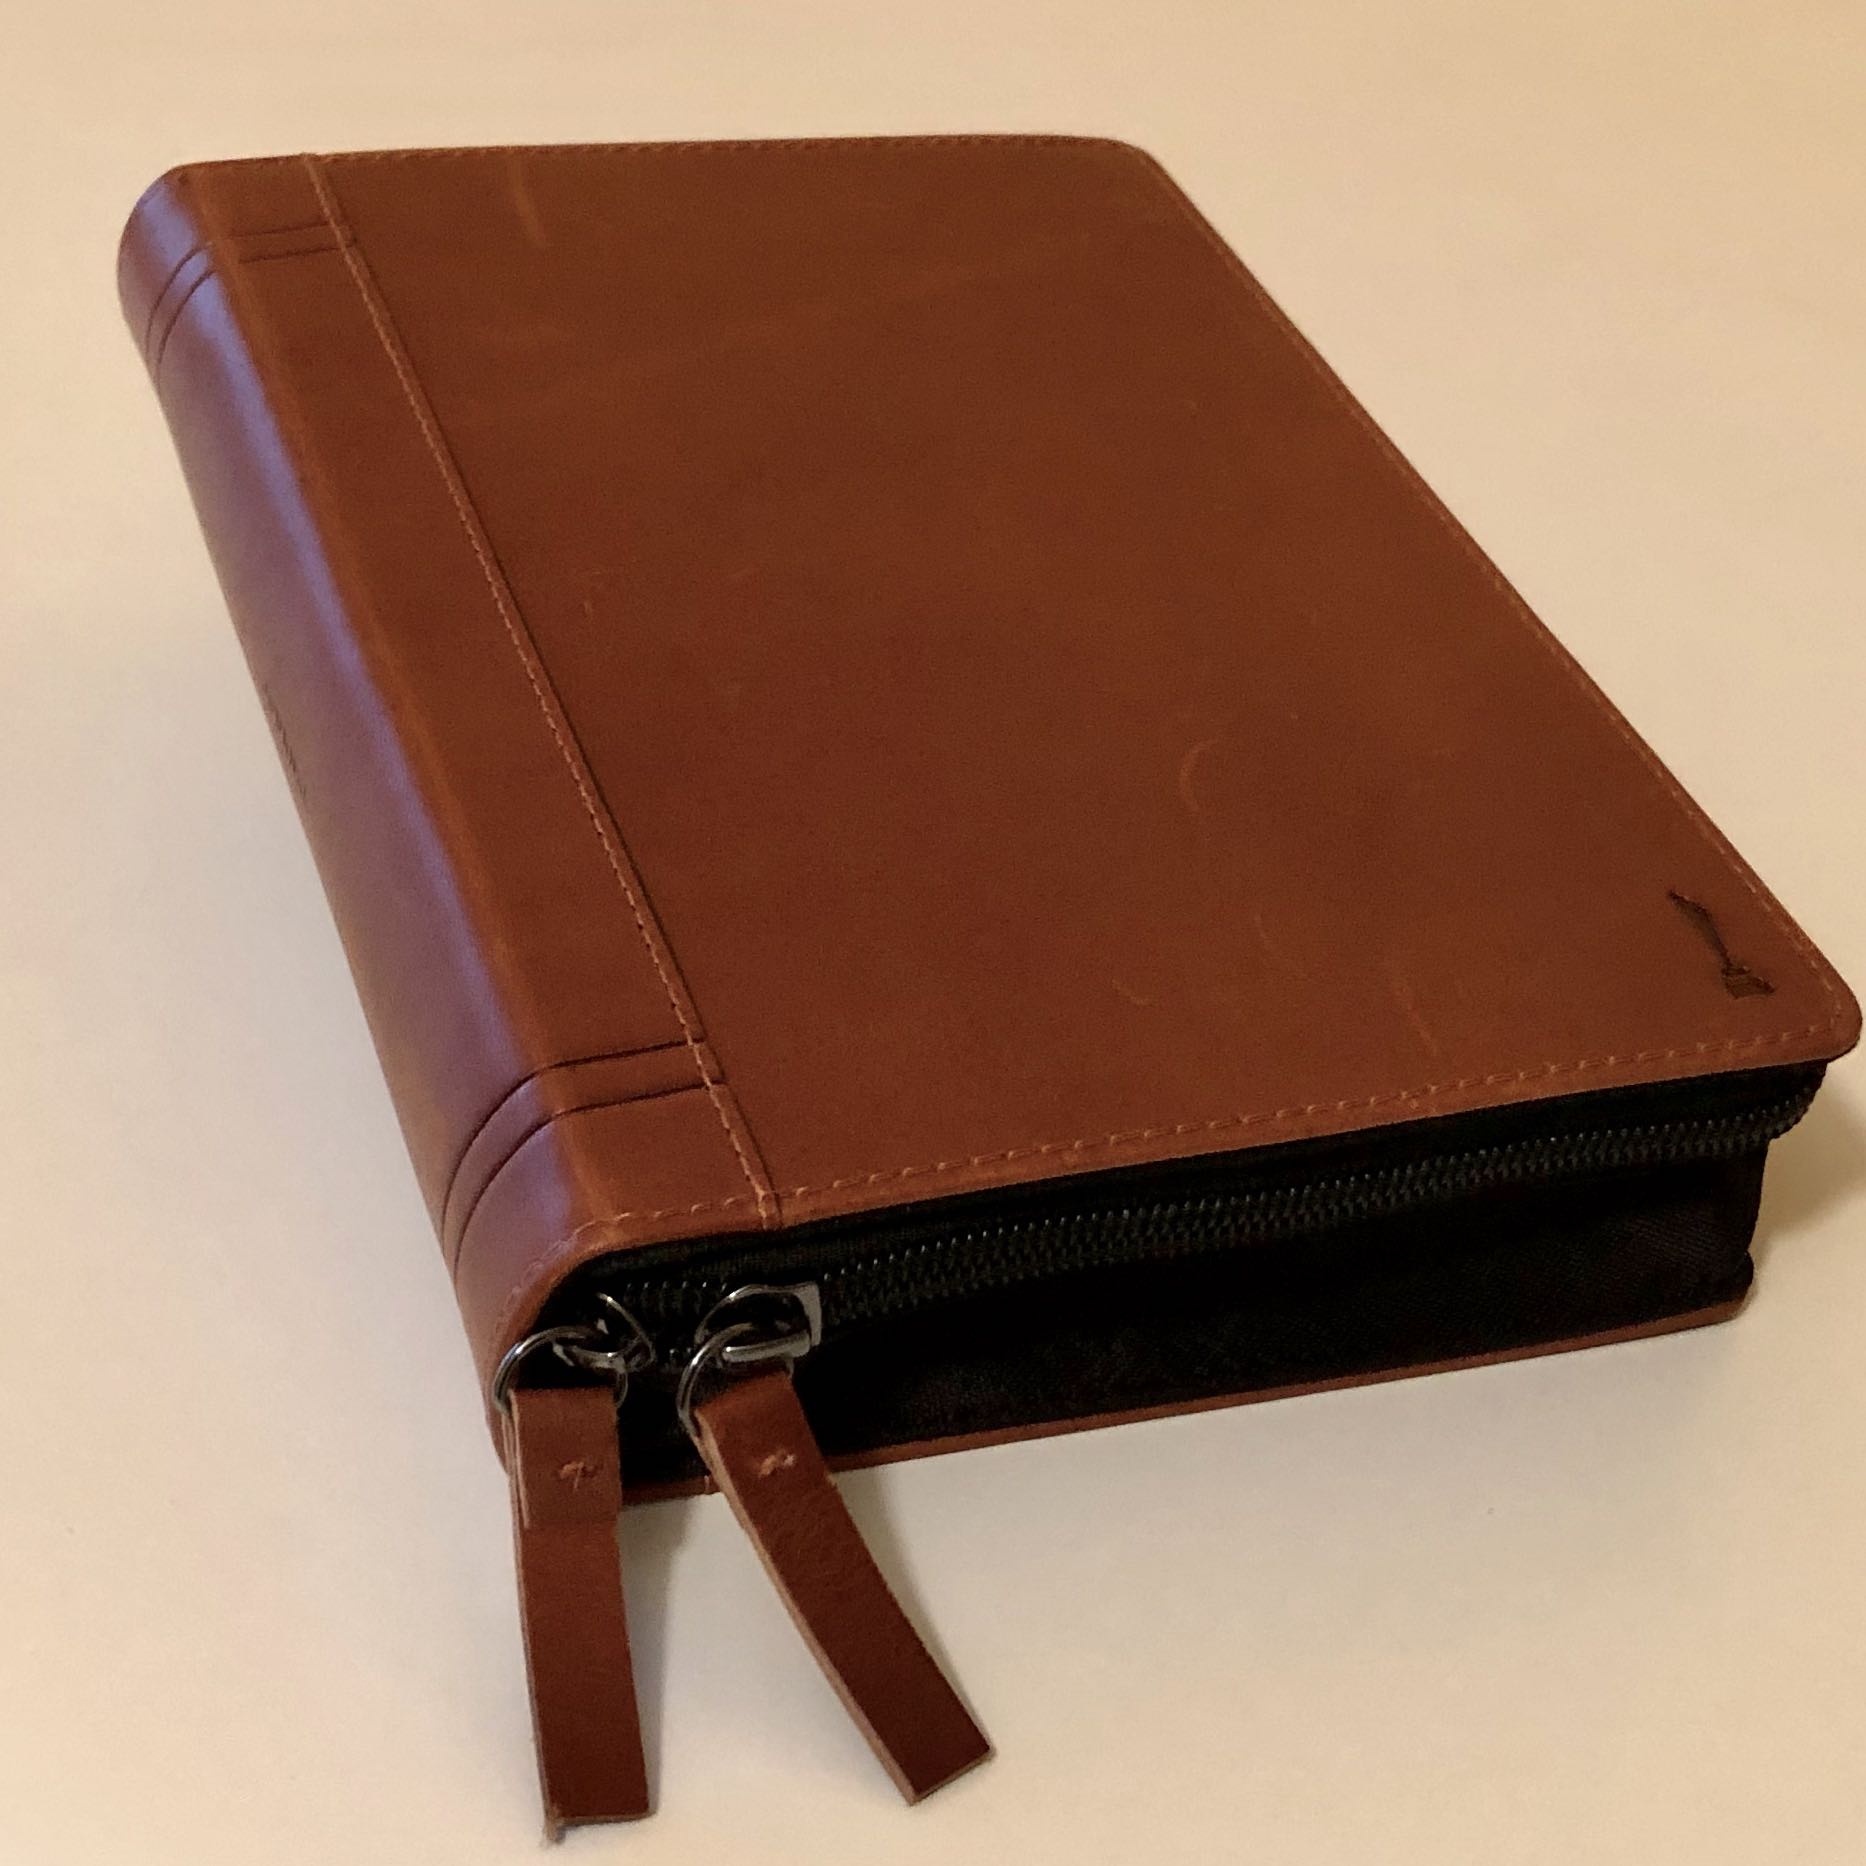 Leather cases - CaddySack travel organizer from Twelve South